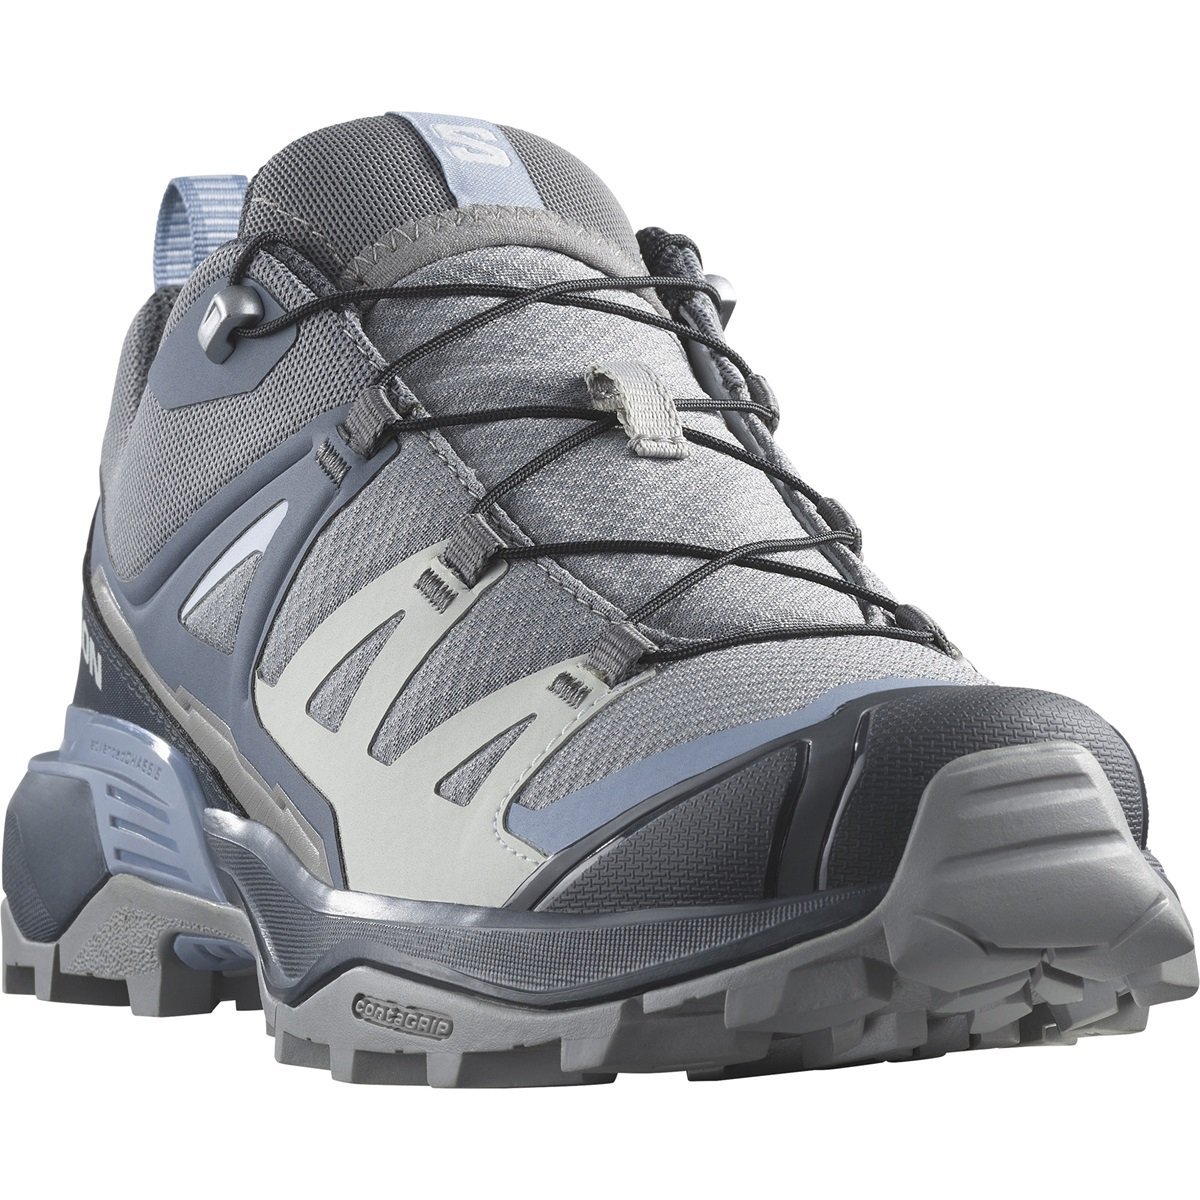 L47450400_5_GHO_X ULTRA 360 W_Sharkskin_Grisaille_Stonewash.png.high-res